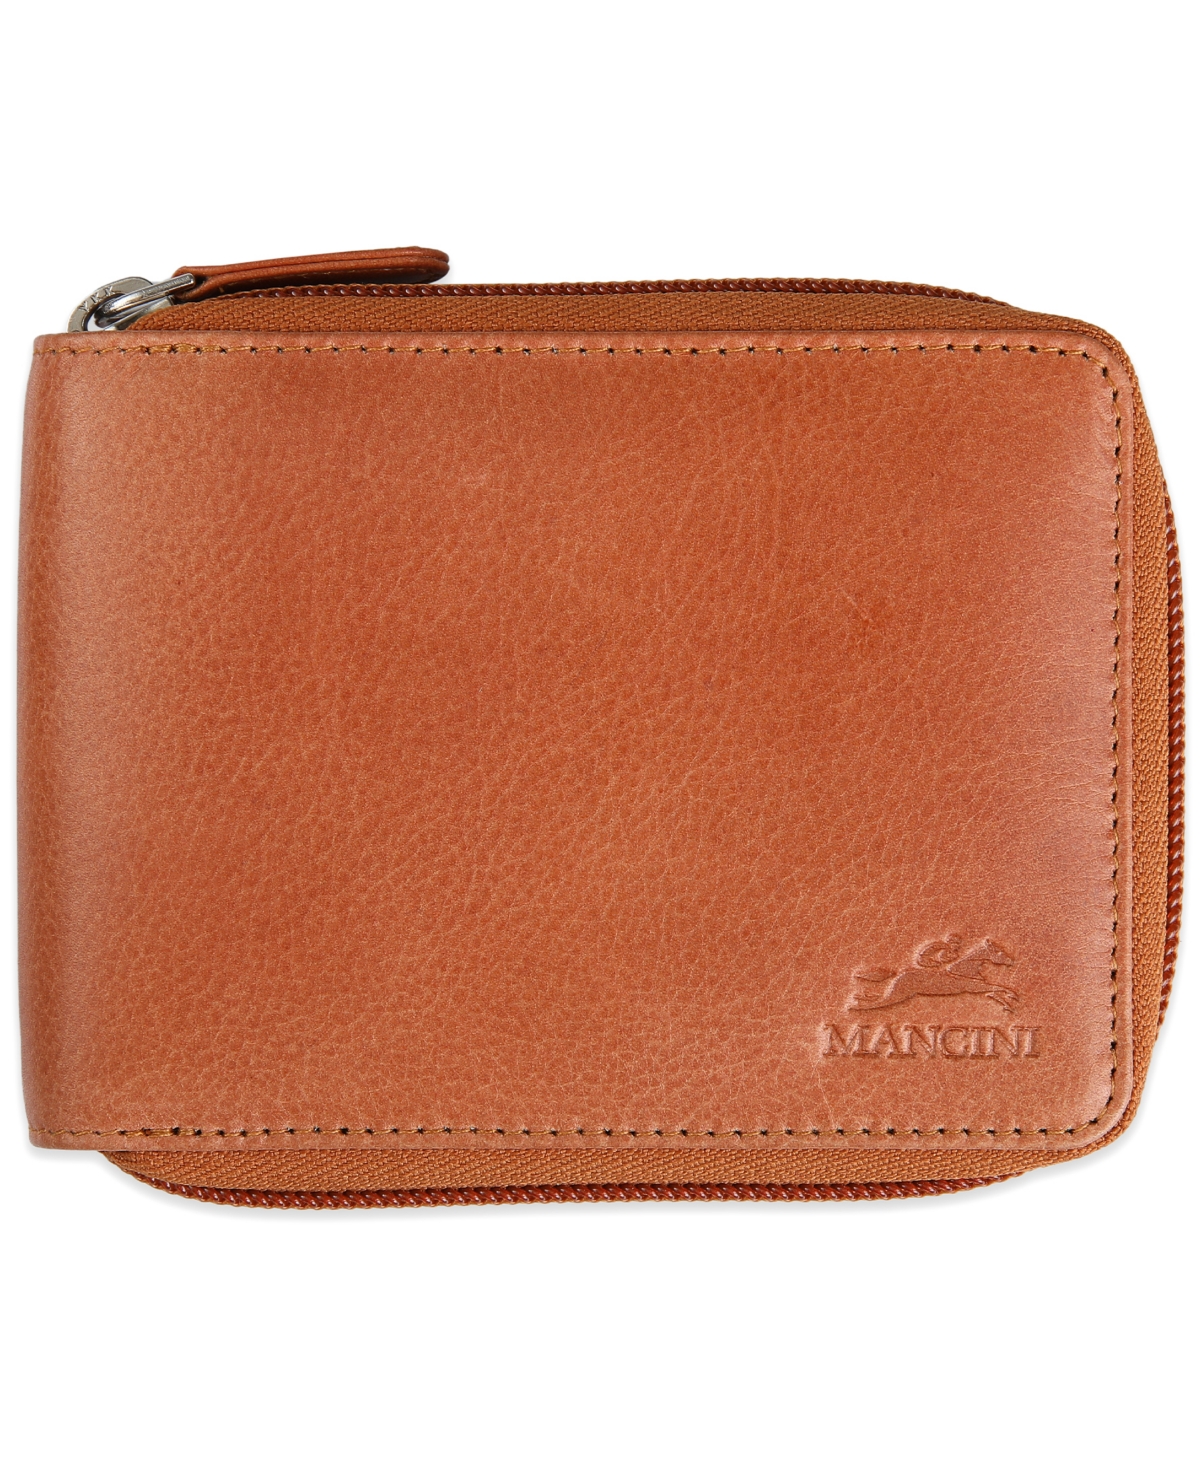 Mancini Men's Bellagio Collection Zippered Bifold Wallet with Removable Pass Case